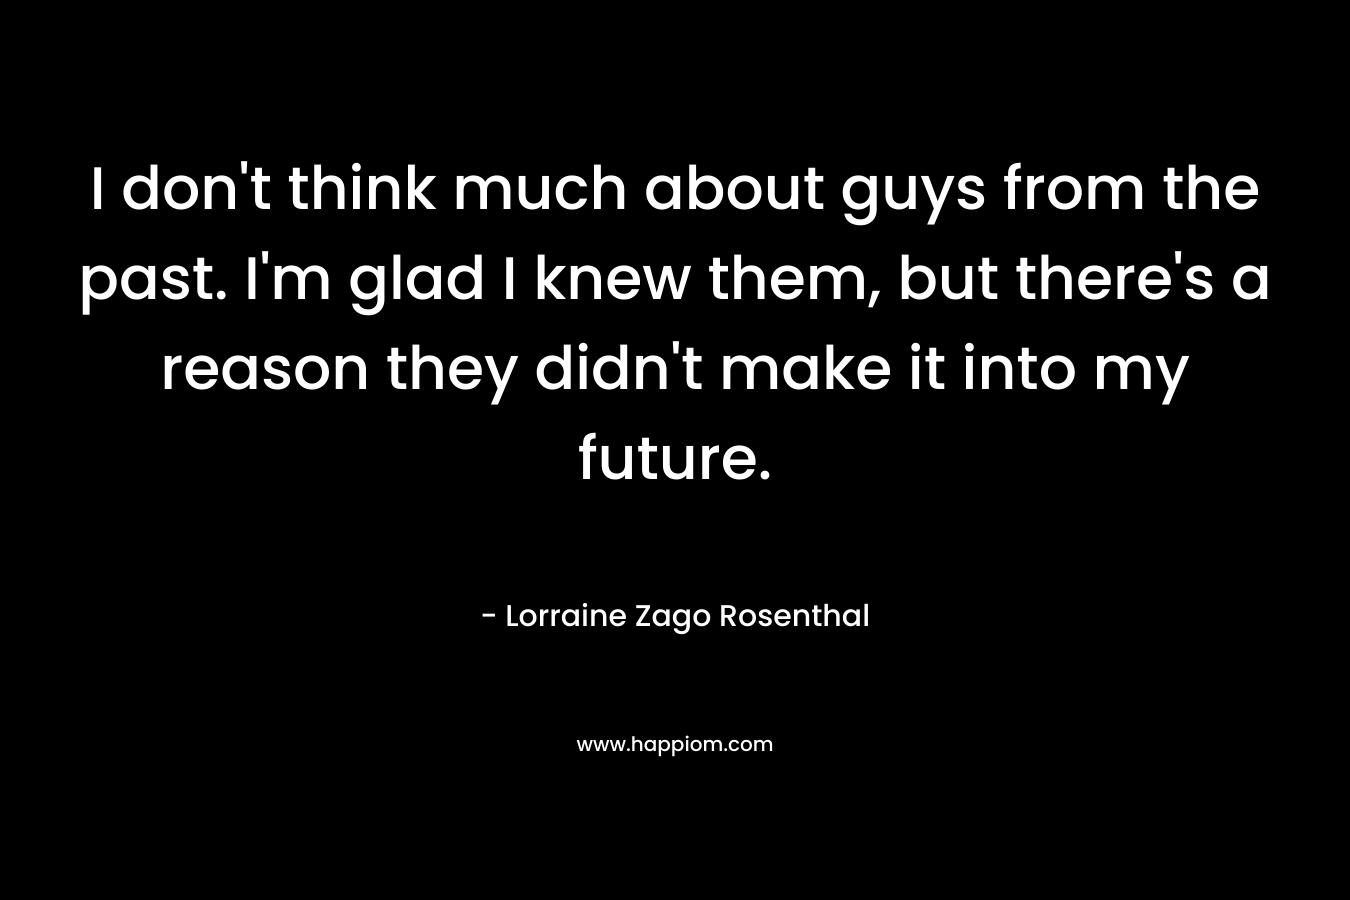 I don’t think much about guys from the past. I’m glad I knew them, but there’s a reason they didn’t make it into my future. – Lorraine Zago Rosenthal